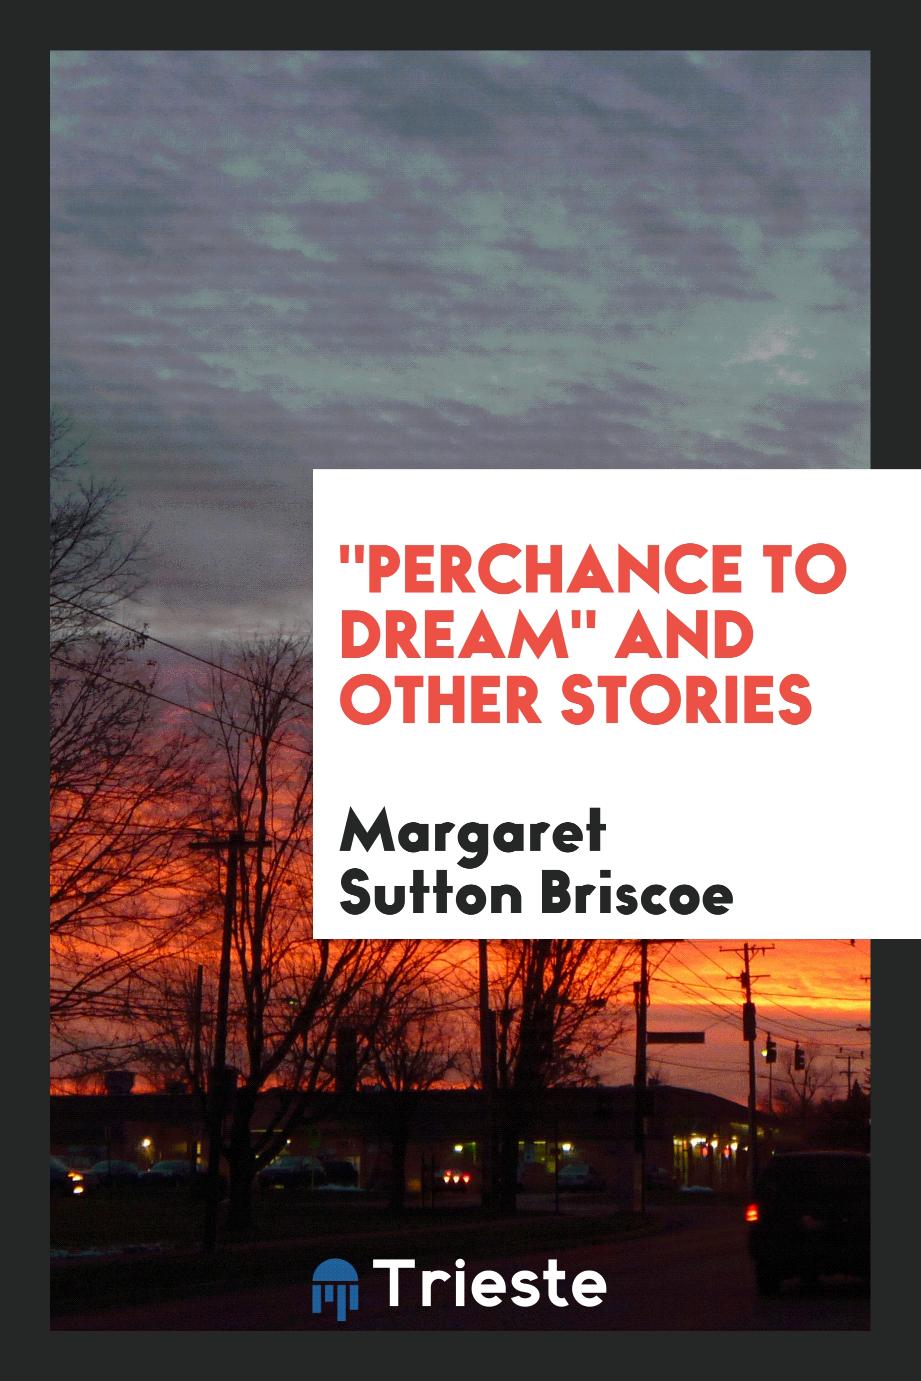 "Perchance to dream" and other stories